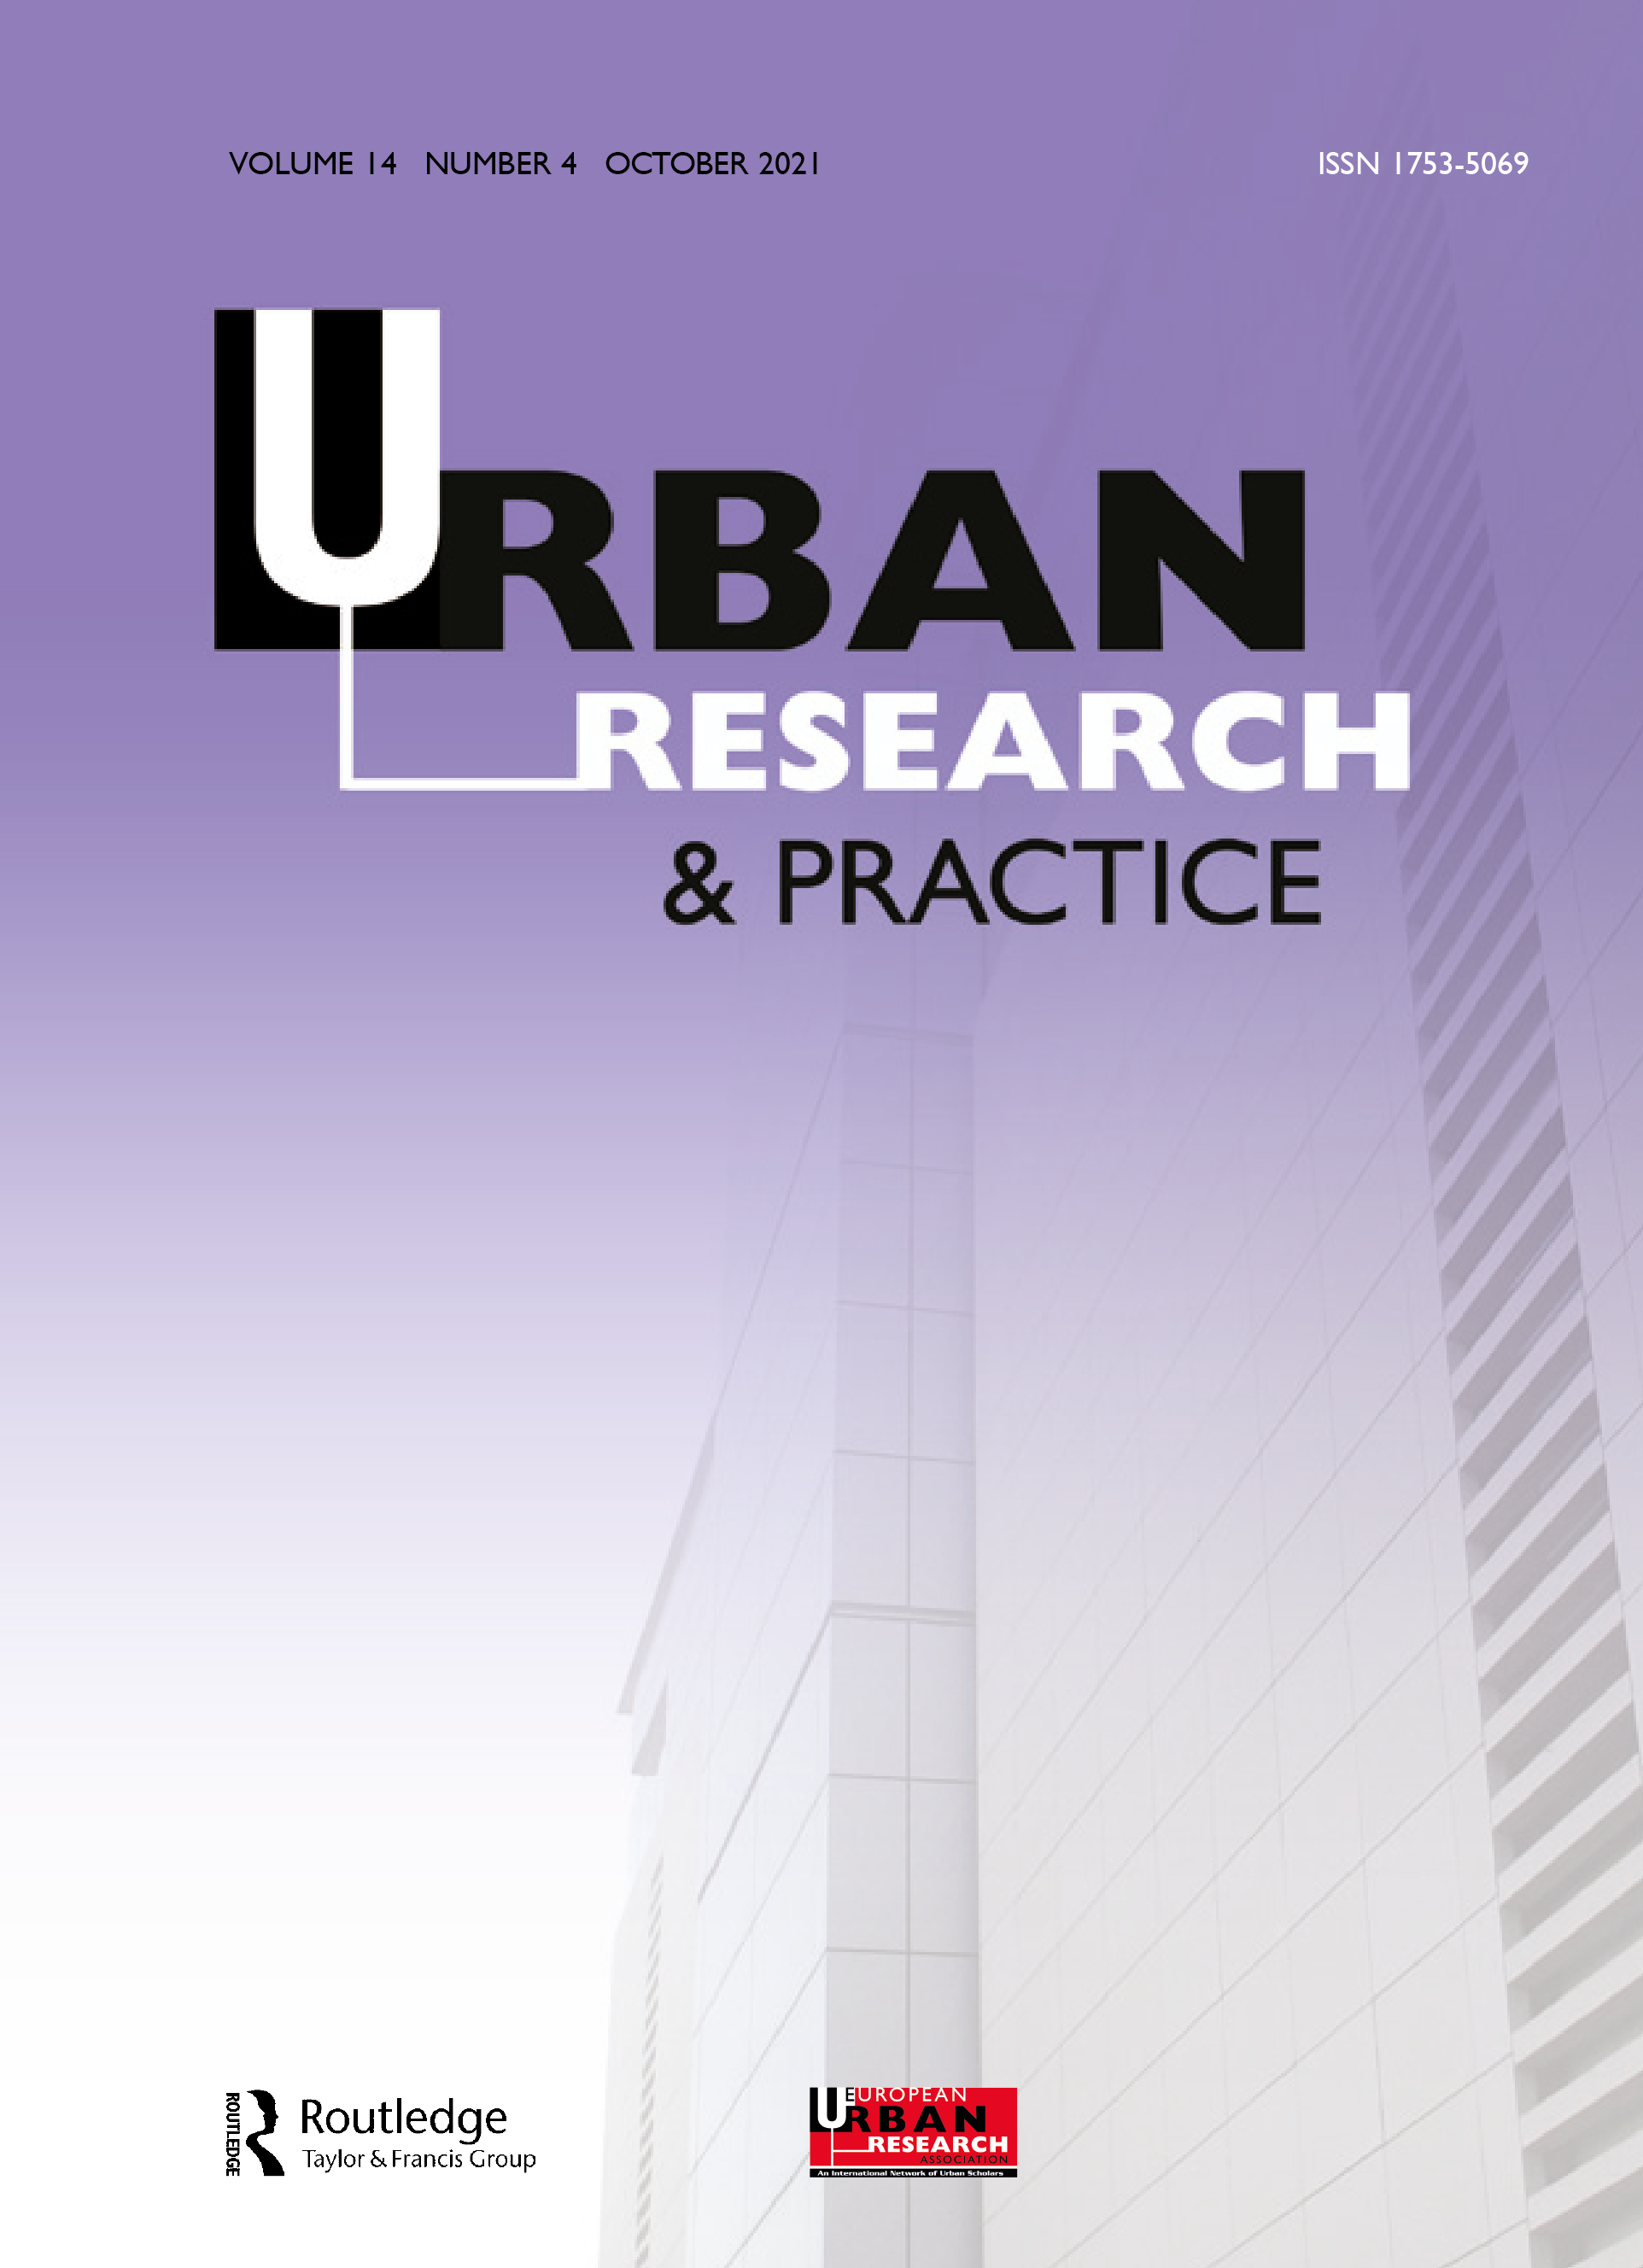 Urban Research and Practice Journal Cover. Volume 14, Issue 4, October 2021